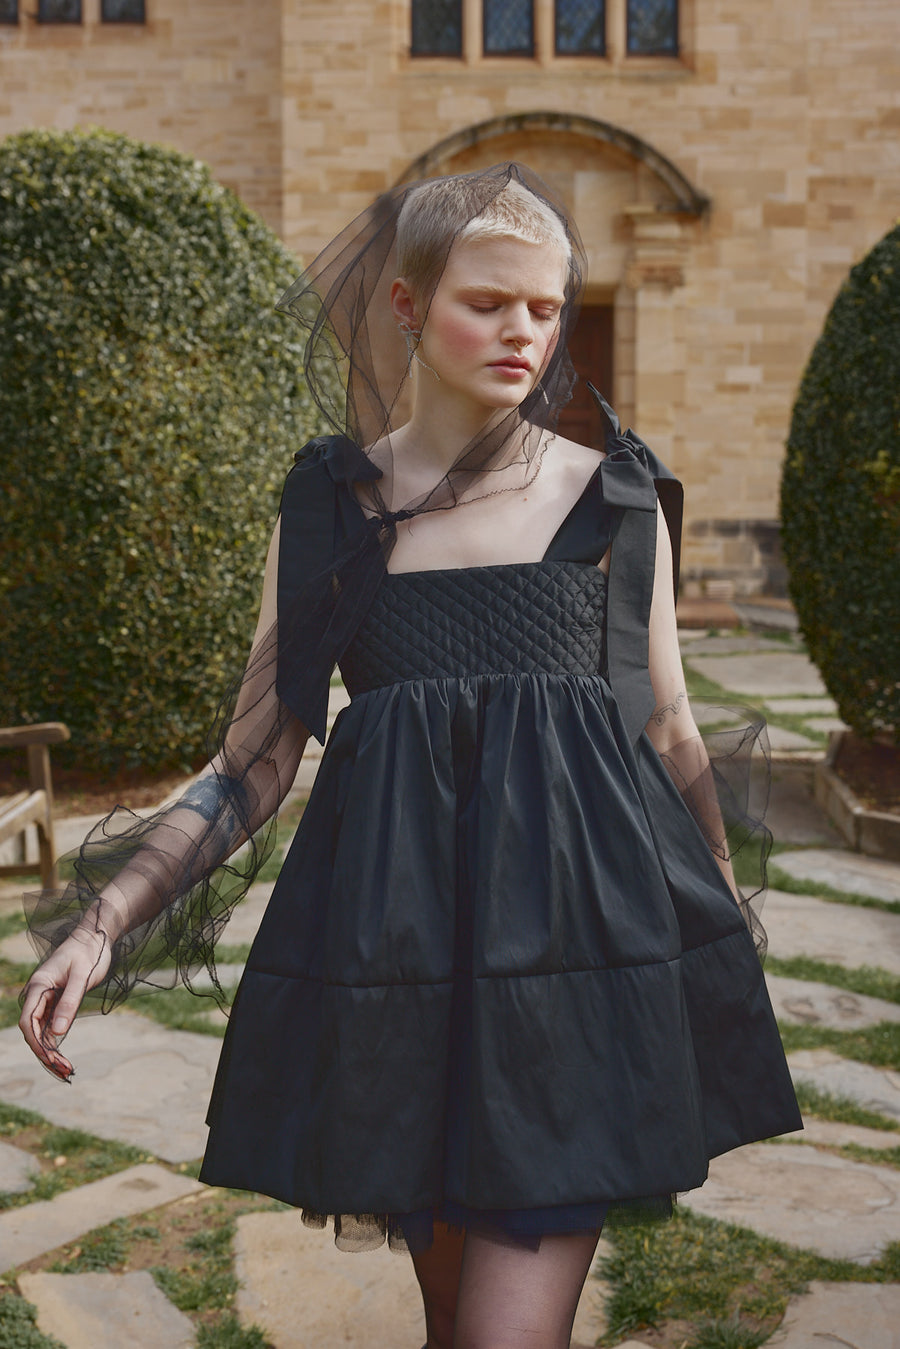 Australian made quilted bodice Dolly Mini Dress in black taffeta by House of Campbell.